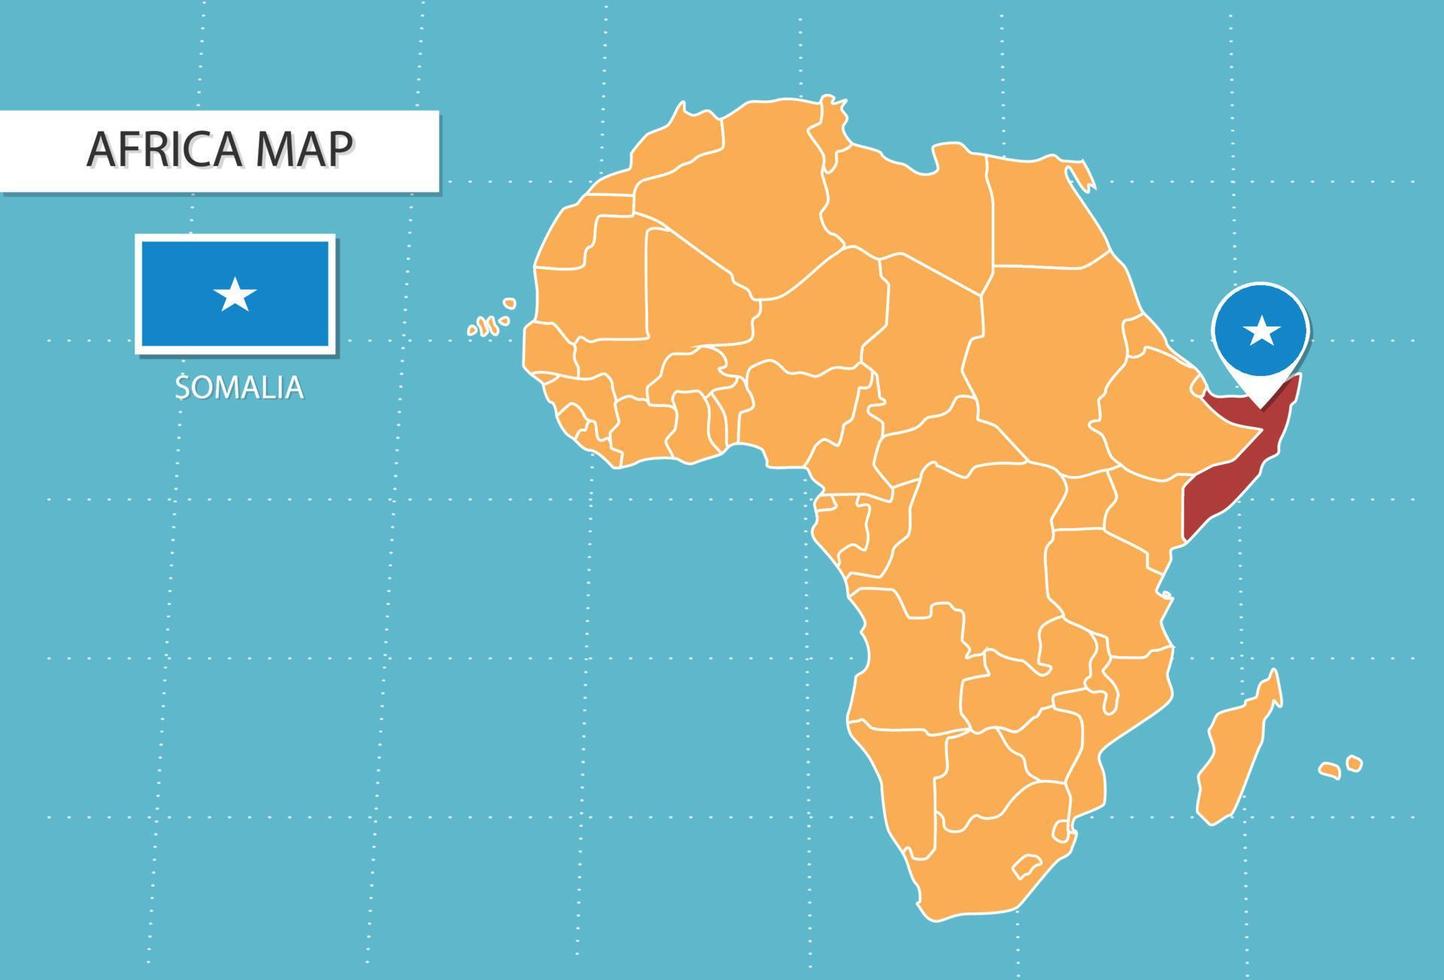 Somalia map in Africa, icons showing Somalia location and flags. vector